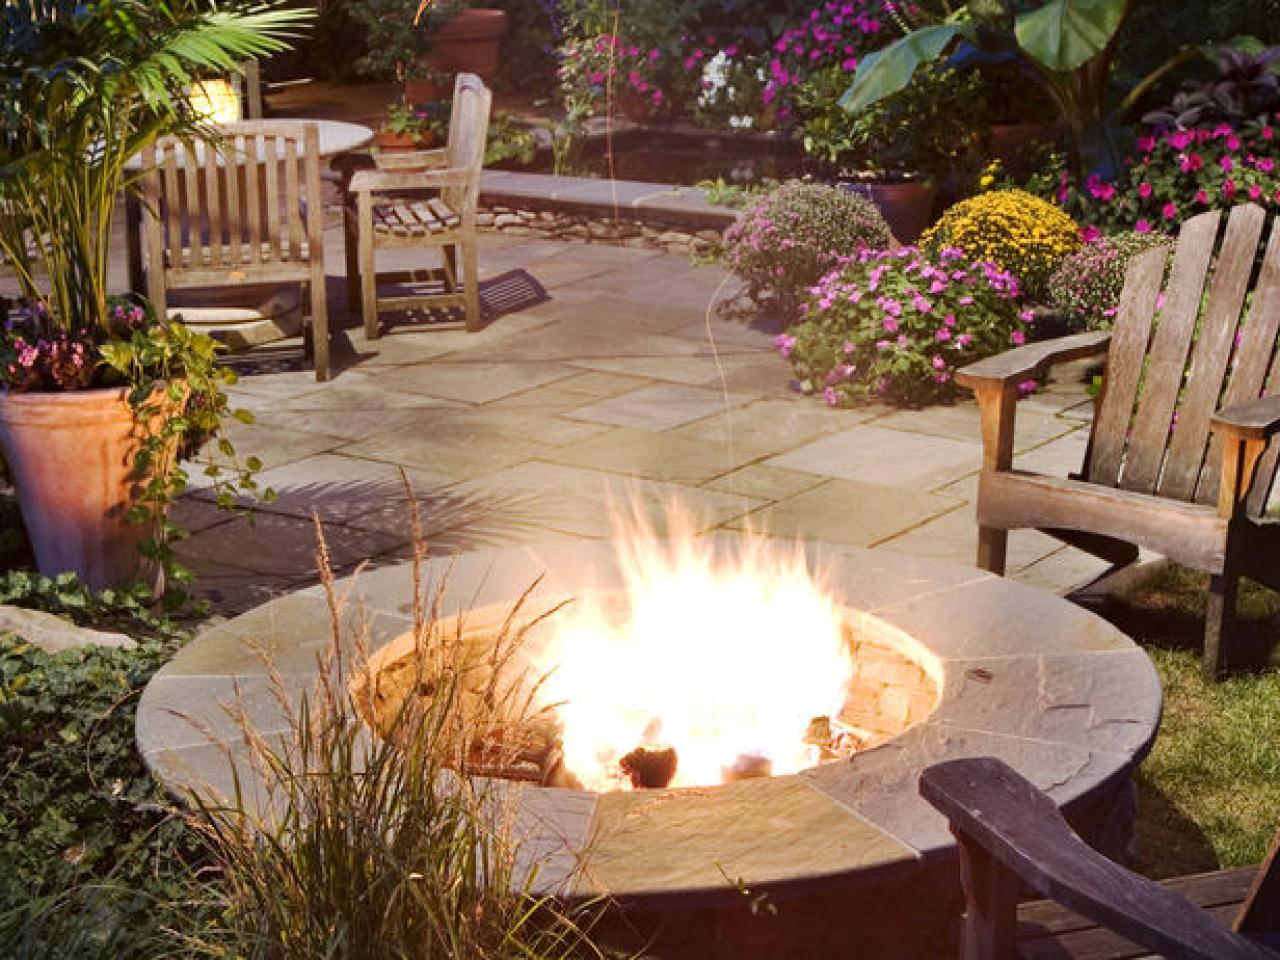 Fire Pit Solutions For Your Backyard, Ceramic Pot Fire Pit